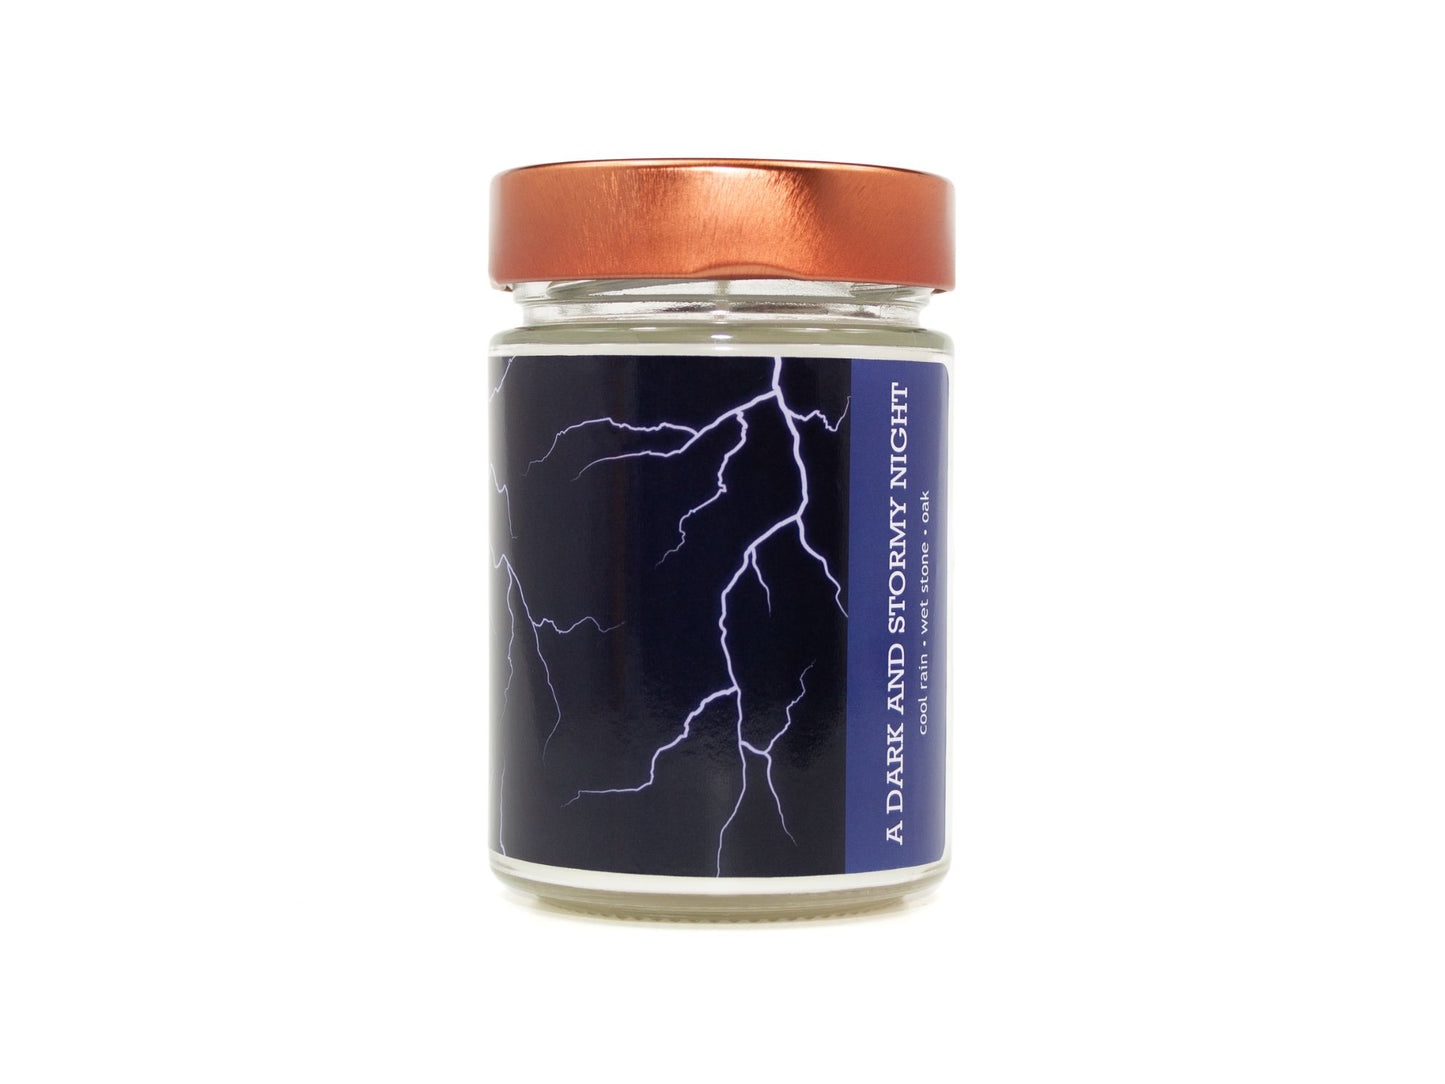 Onset & Rime rain scented candle called "A Dark and Stormy Night" in a 10 oz glass jar with copper lid. The label is dark blue with white lightning bolts. The text on the label is "A Dark and Stormy Night - Cool Rain, Wet Stone, Oak".